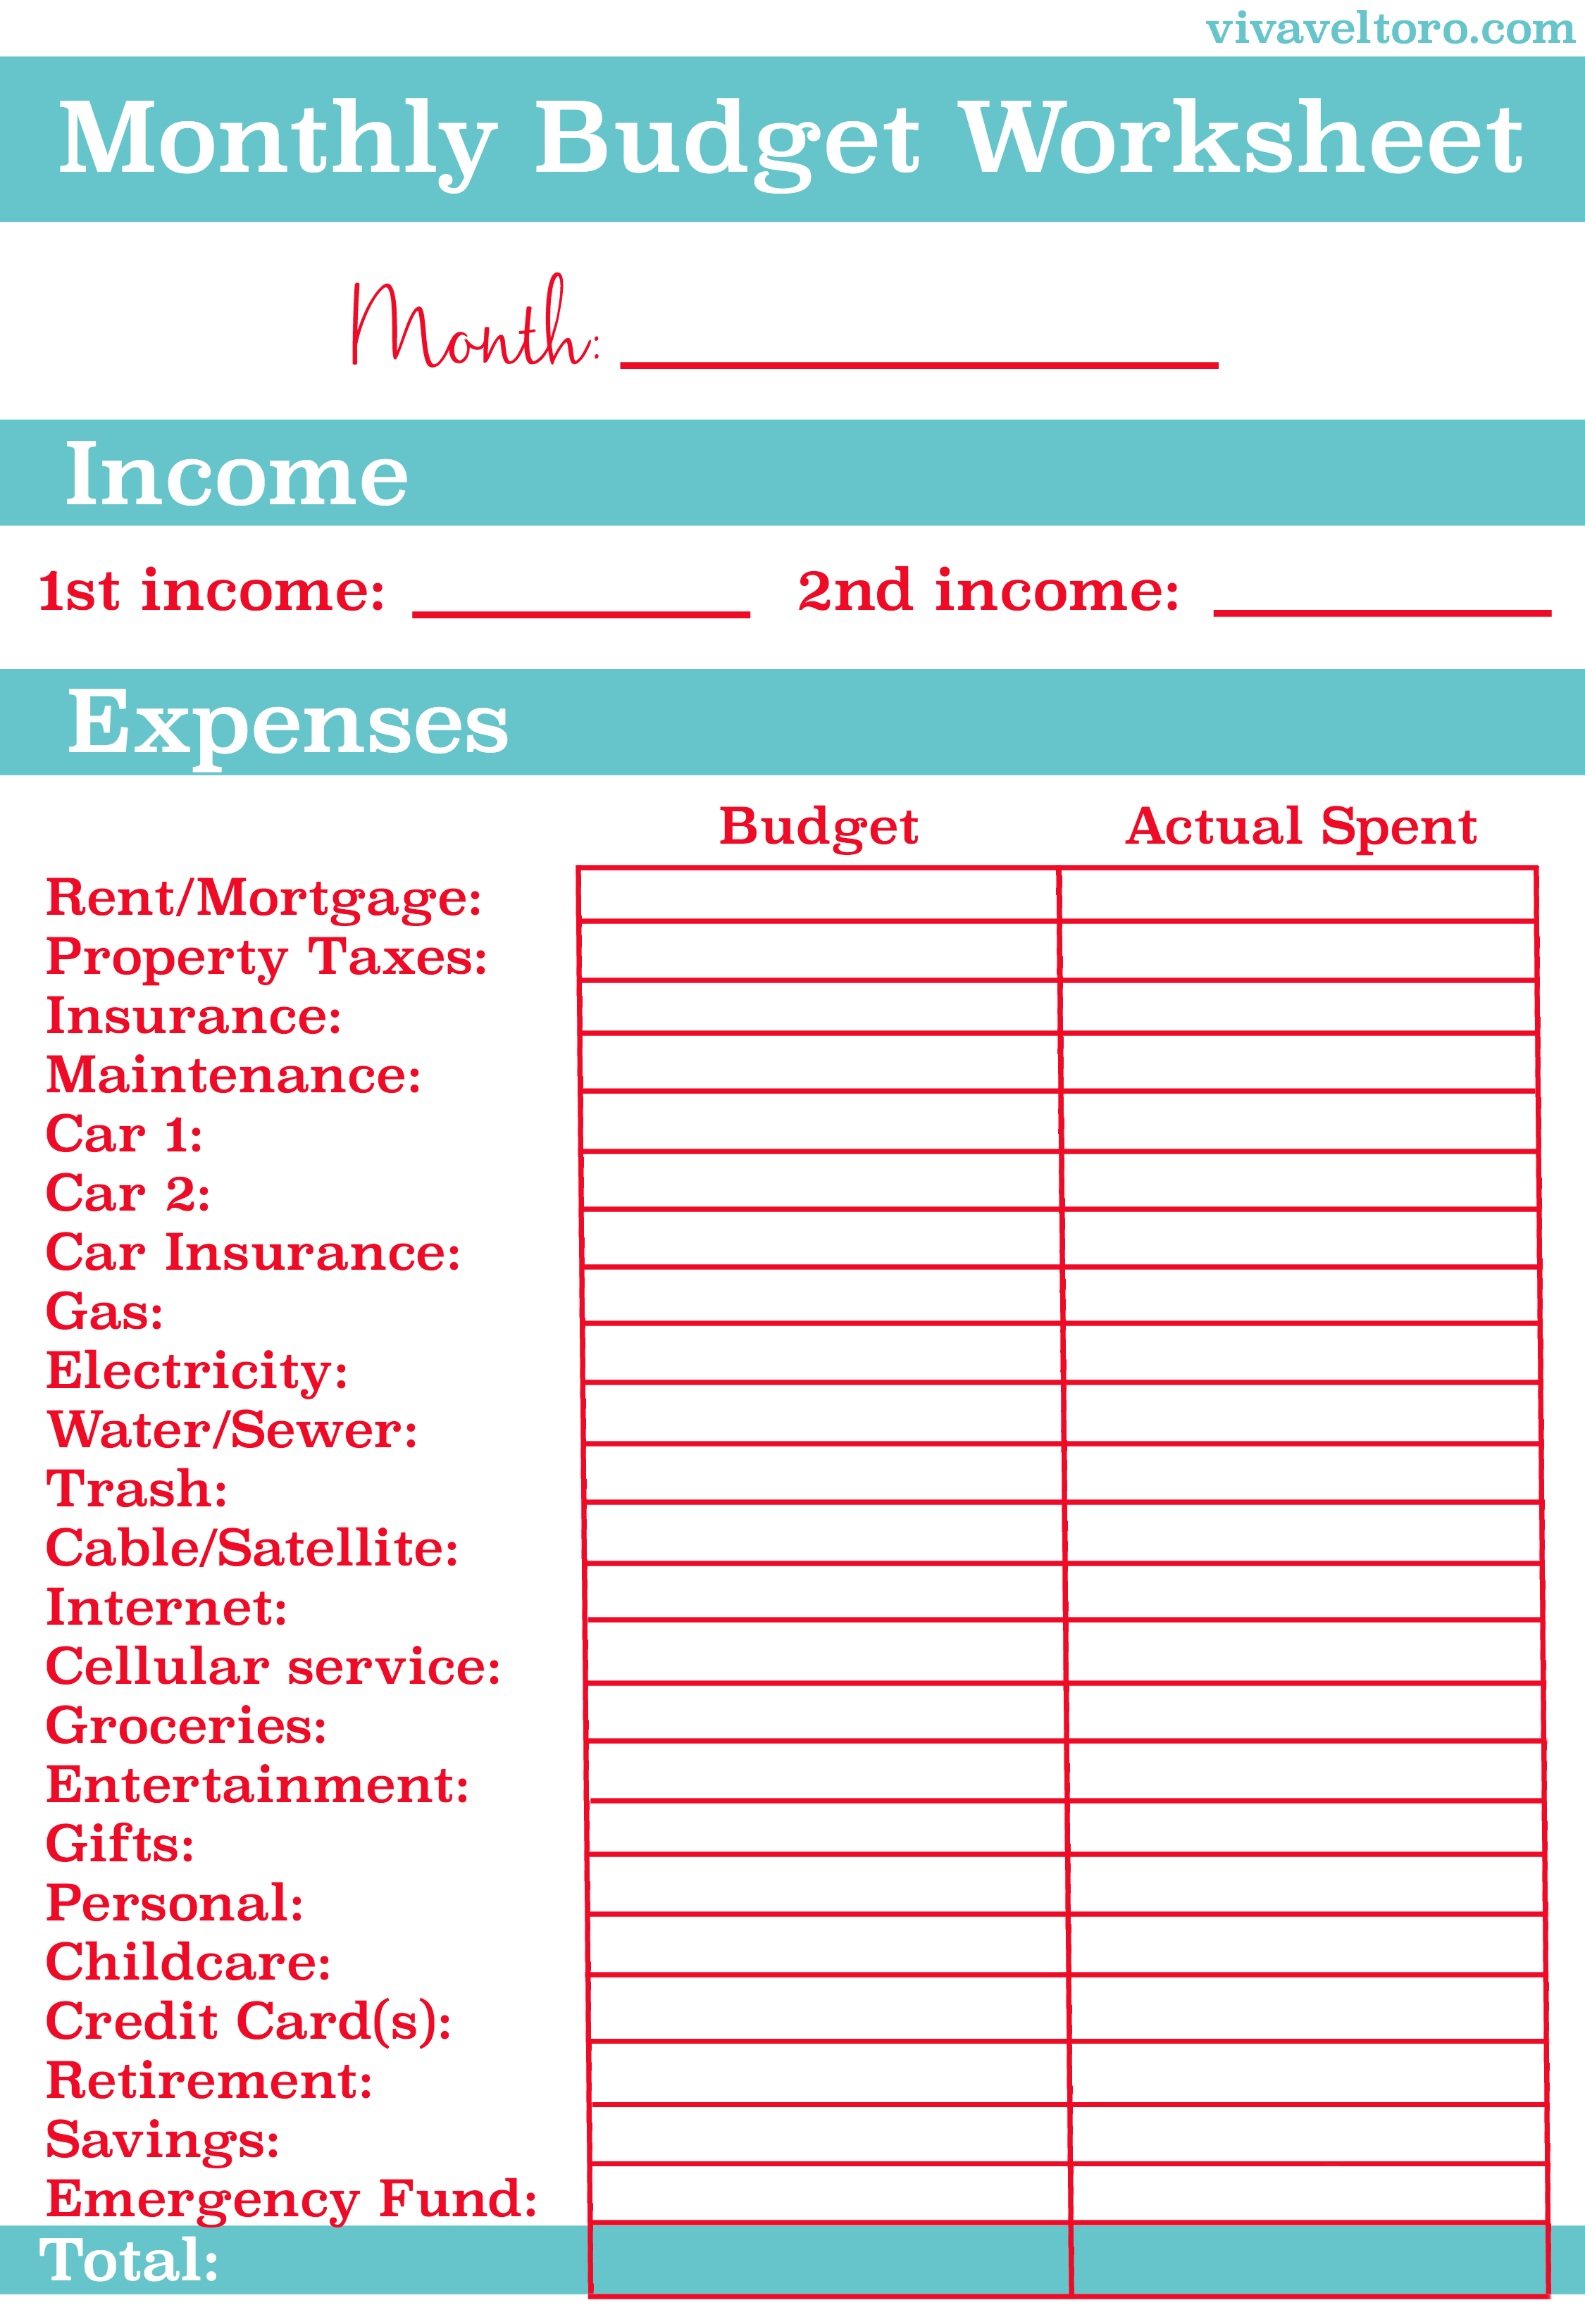 Great Budget Worksheet Budget Worksheet Budgeting Tips Free Download 